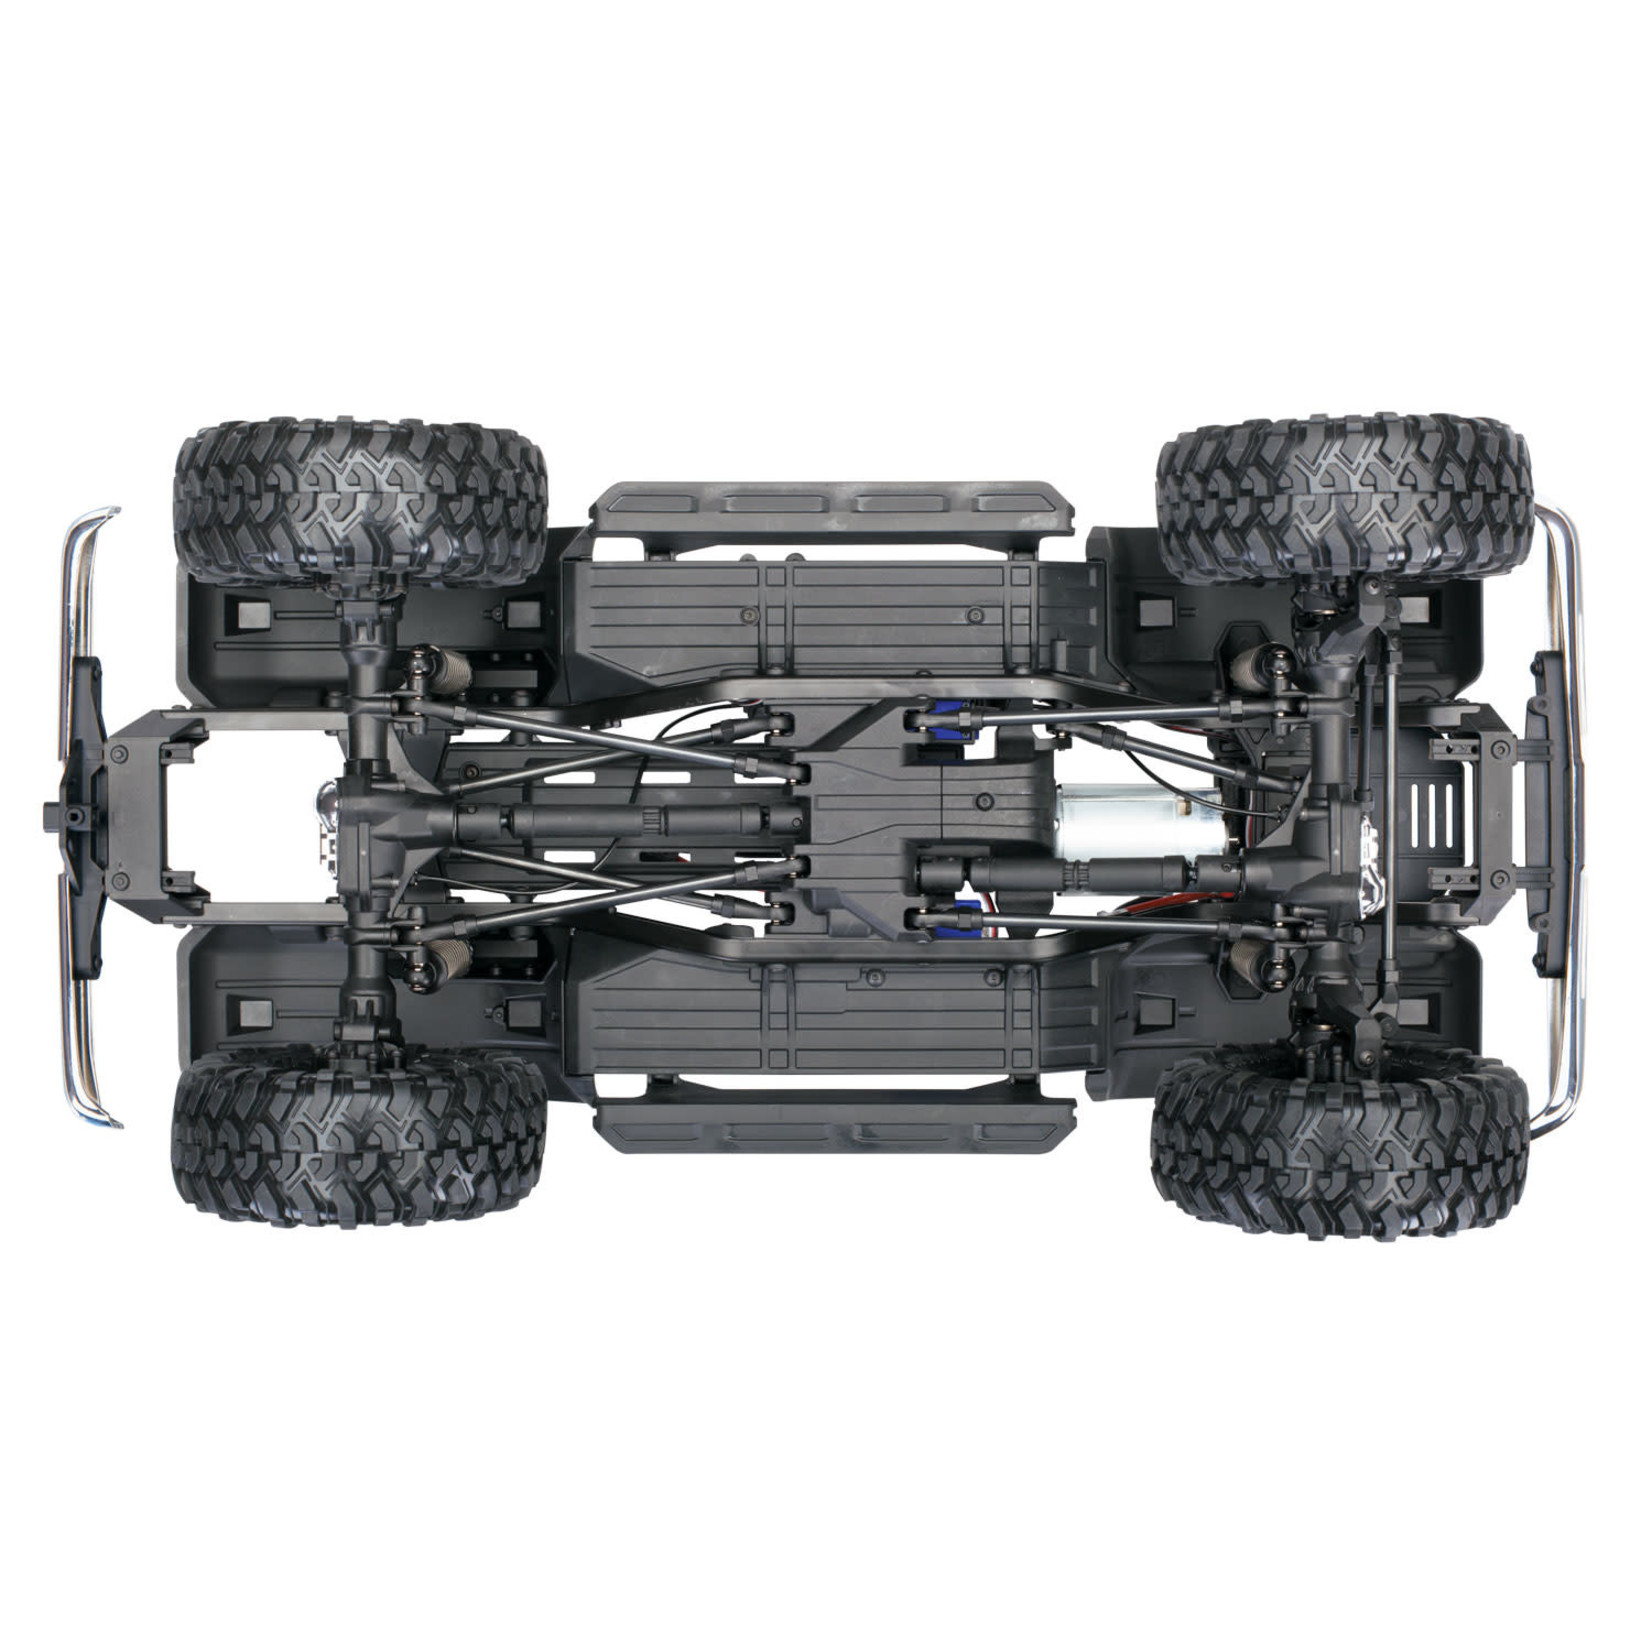 TRAXXAS TRX-4® Scale and Trail™ Crawler with 1979 Chevrolet Blazer Body:  4WD Electric Truck with TQi Traxxas Link™ Enabled 2.4GHz Radio System